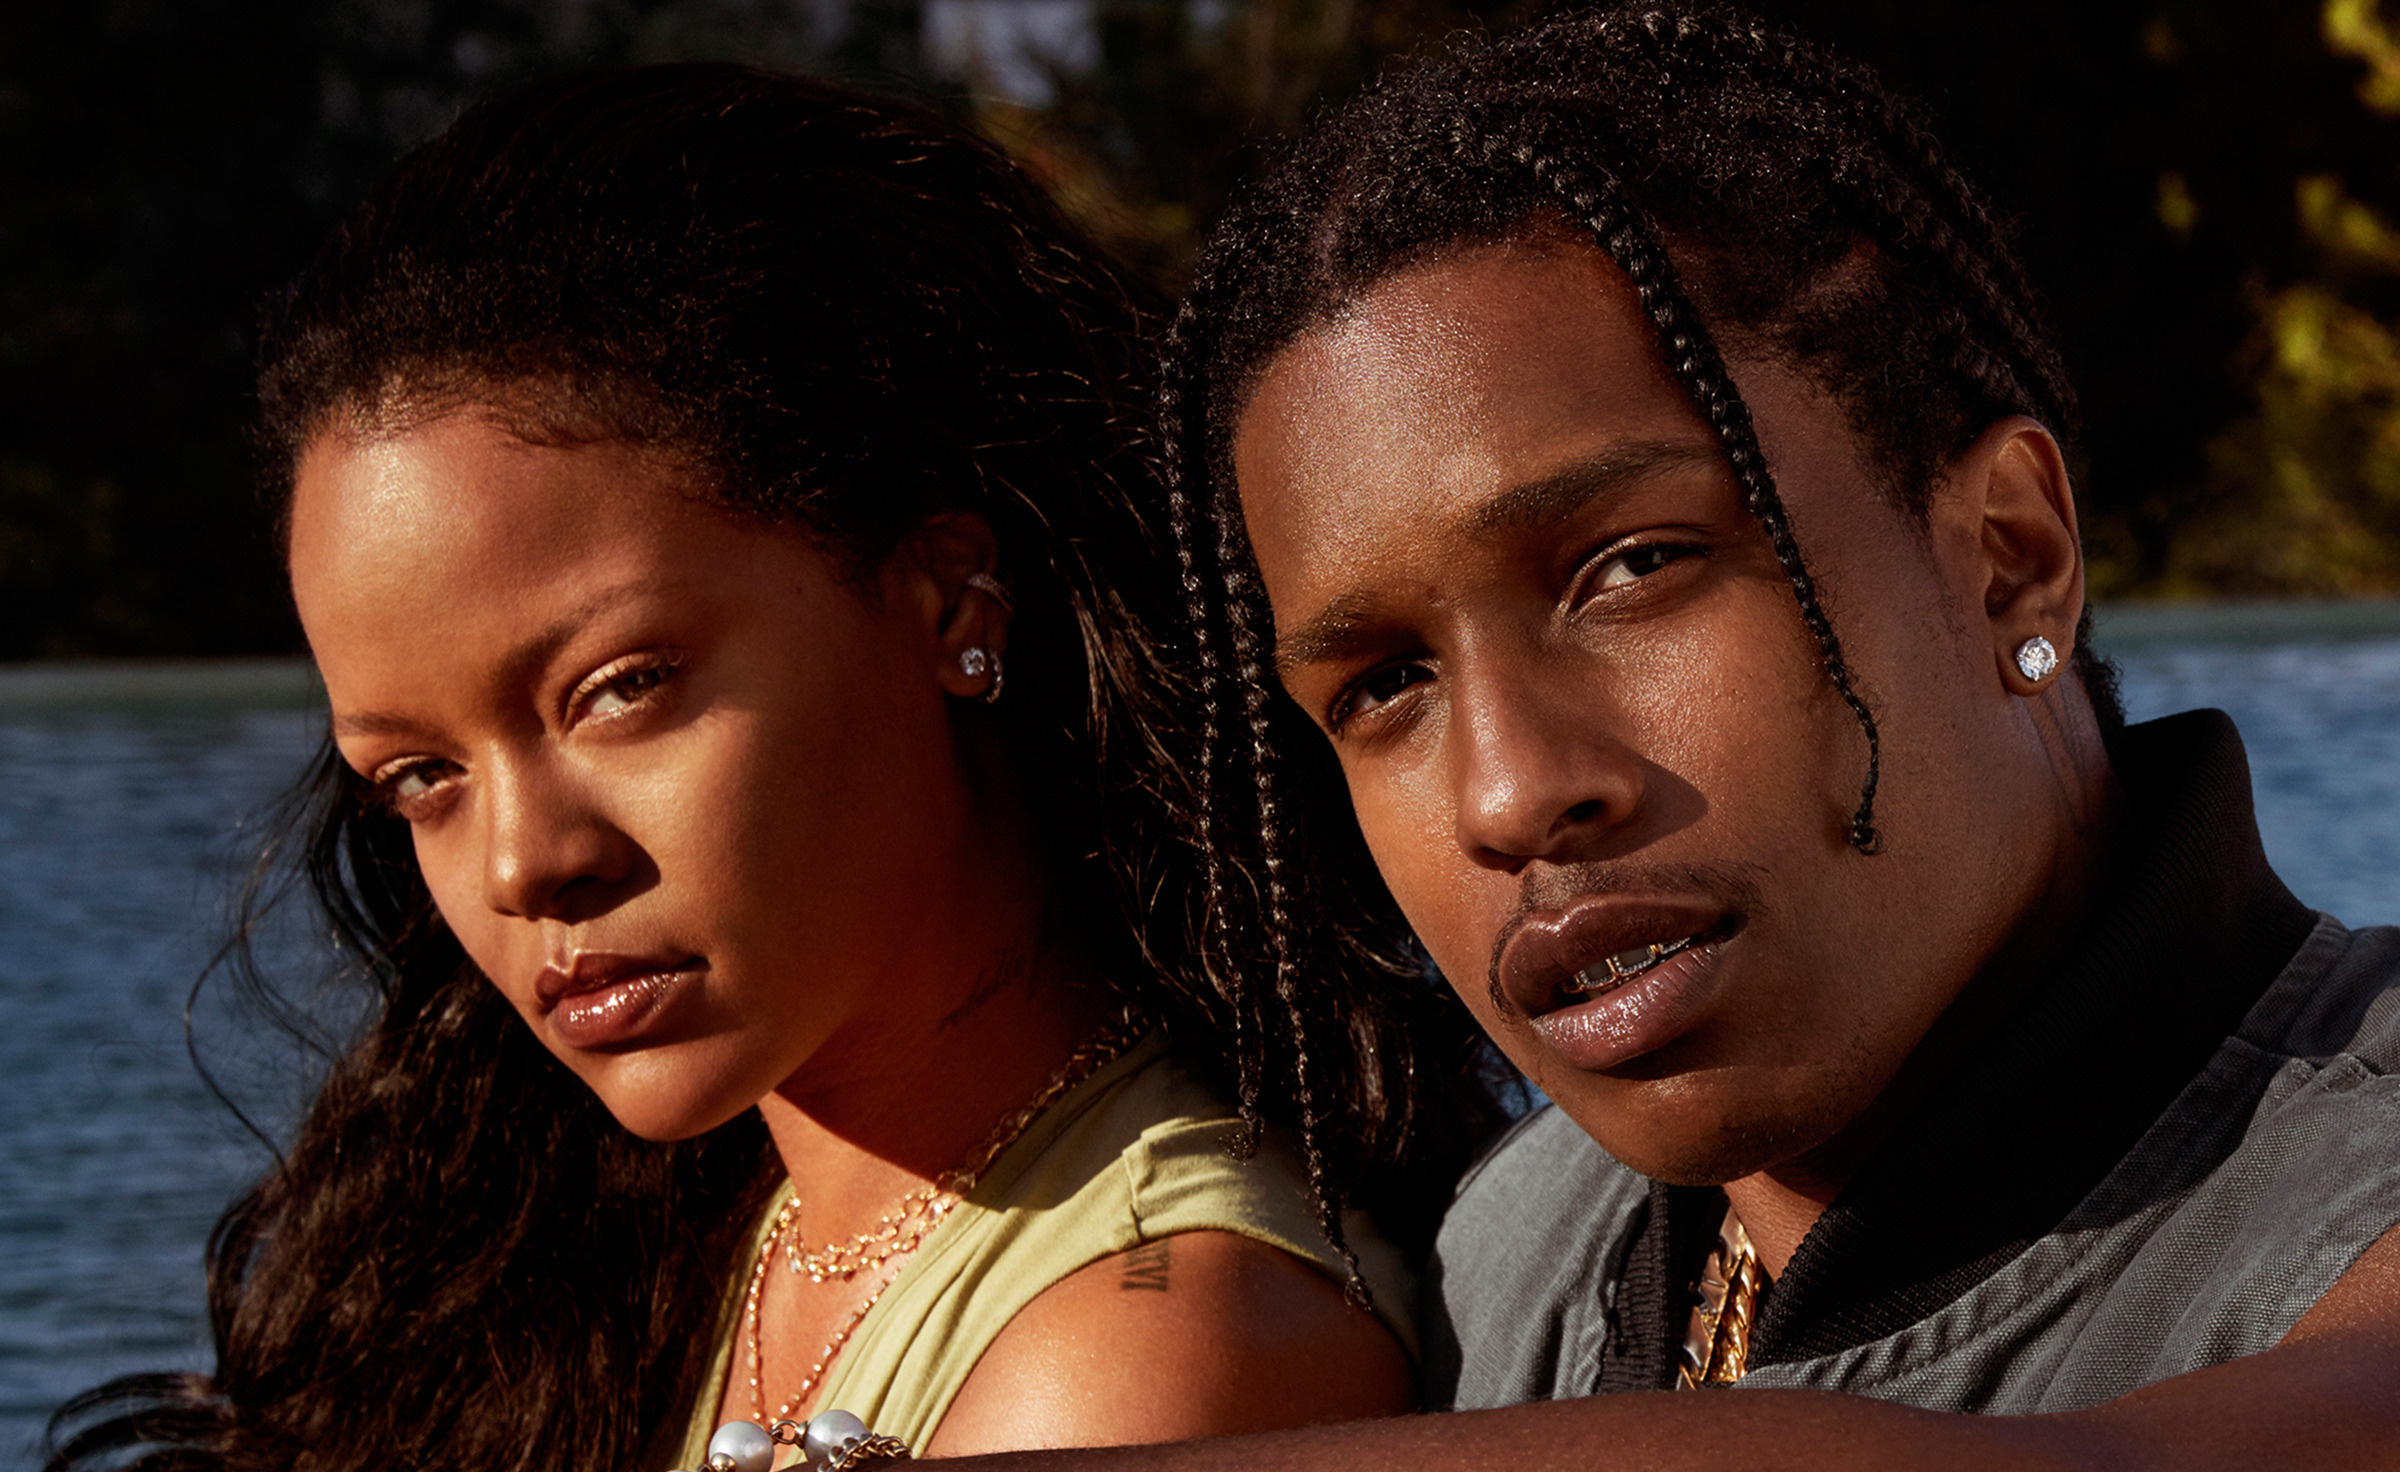 Rihanna and ASAP Rocky: An American rapper who burst on the music scene in 2011. 2400x1480 HD Wallpaper.